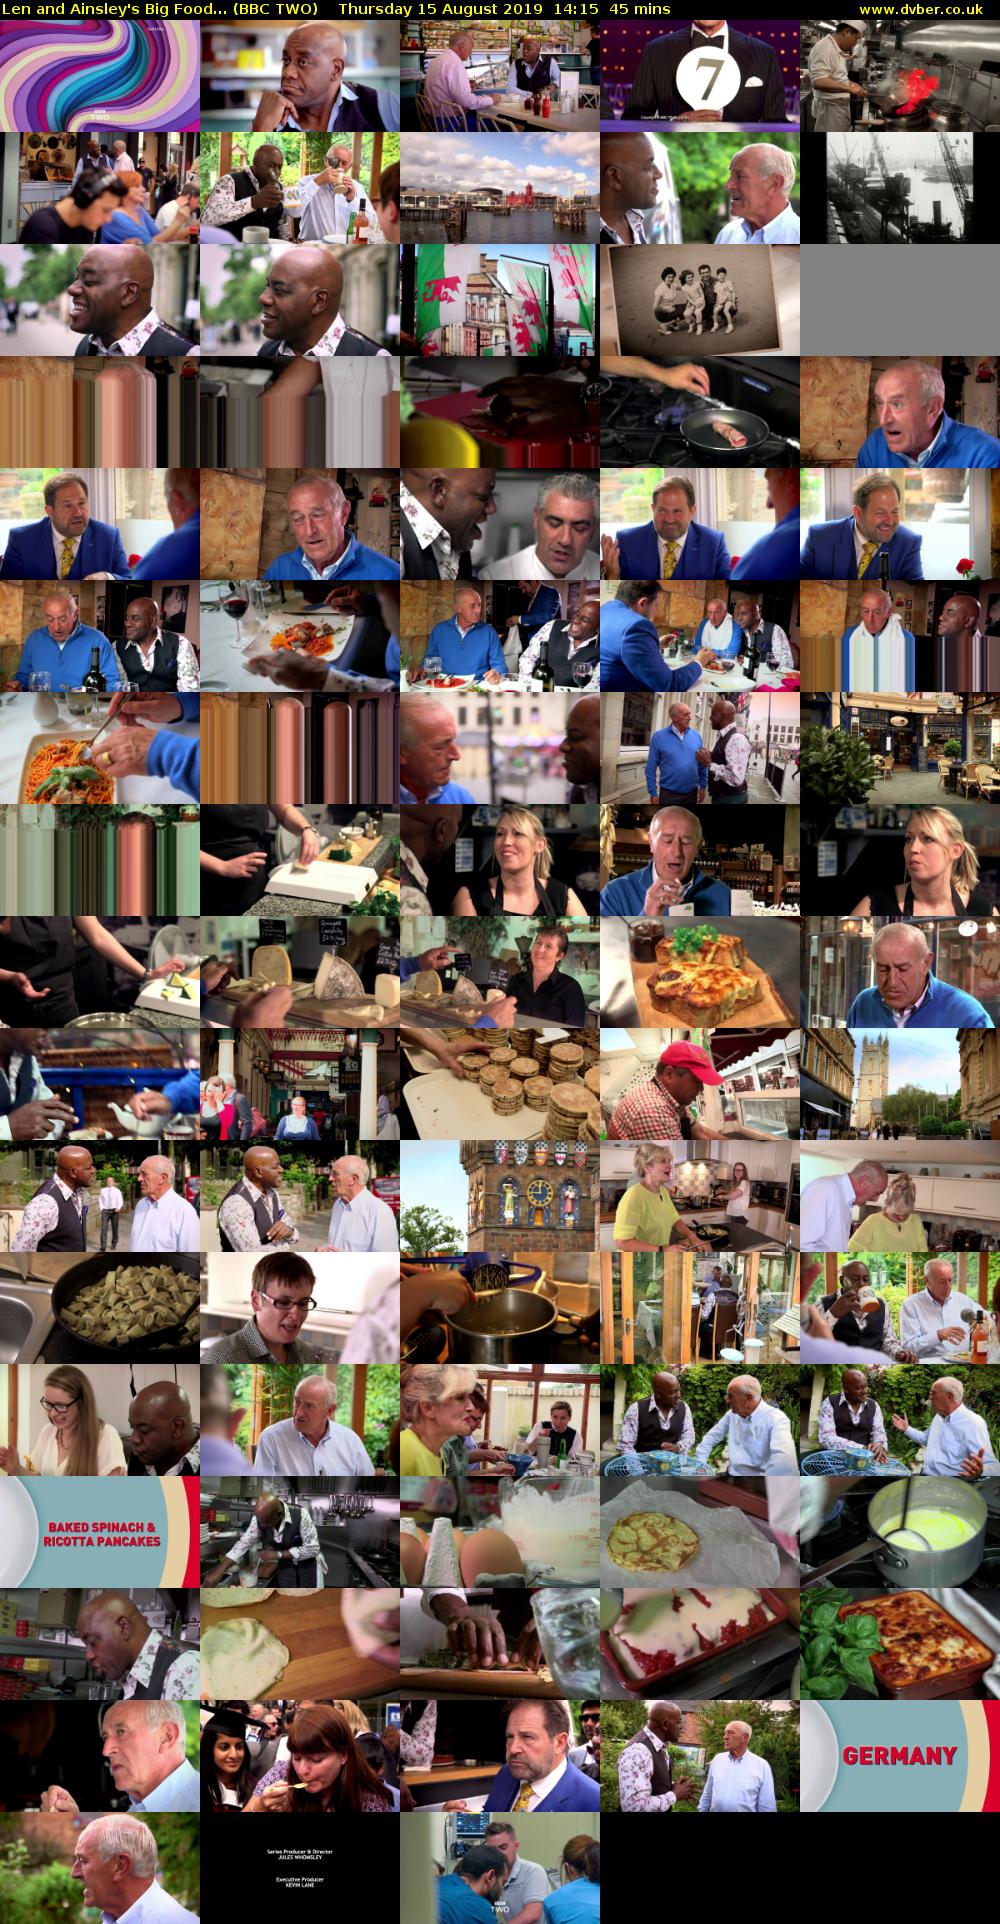 Len and Ainsley's Big Food... (BBC TWO) Thursday 15 August 2019 14:15 - 15:00